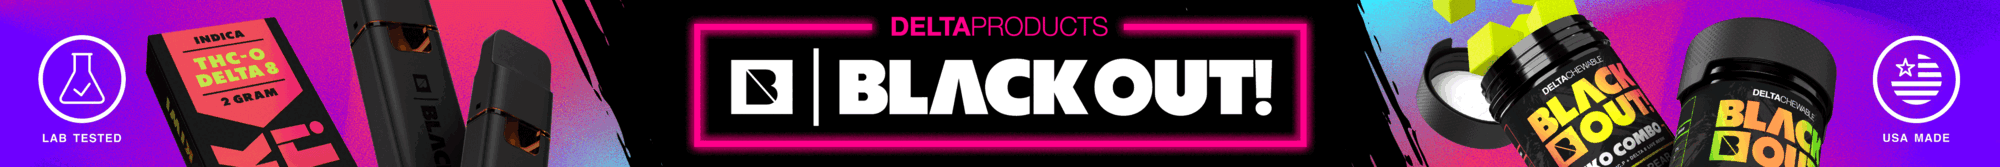 Black Out Products